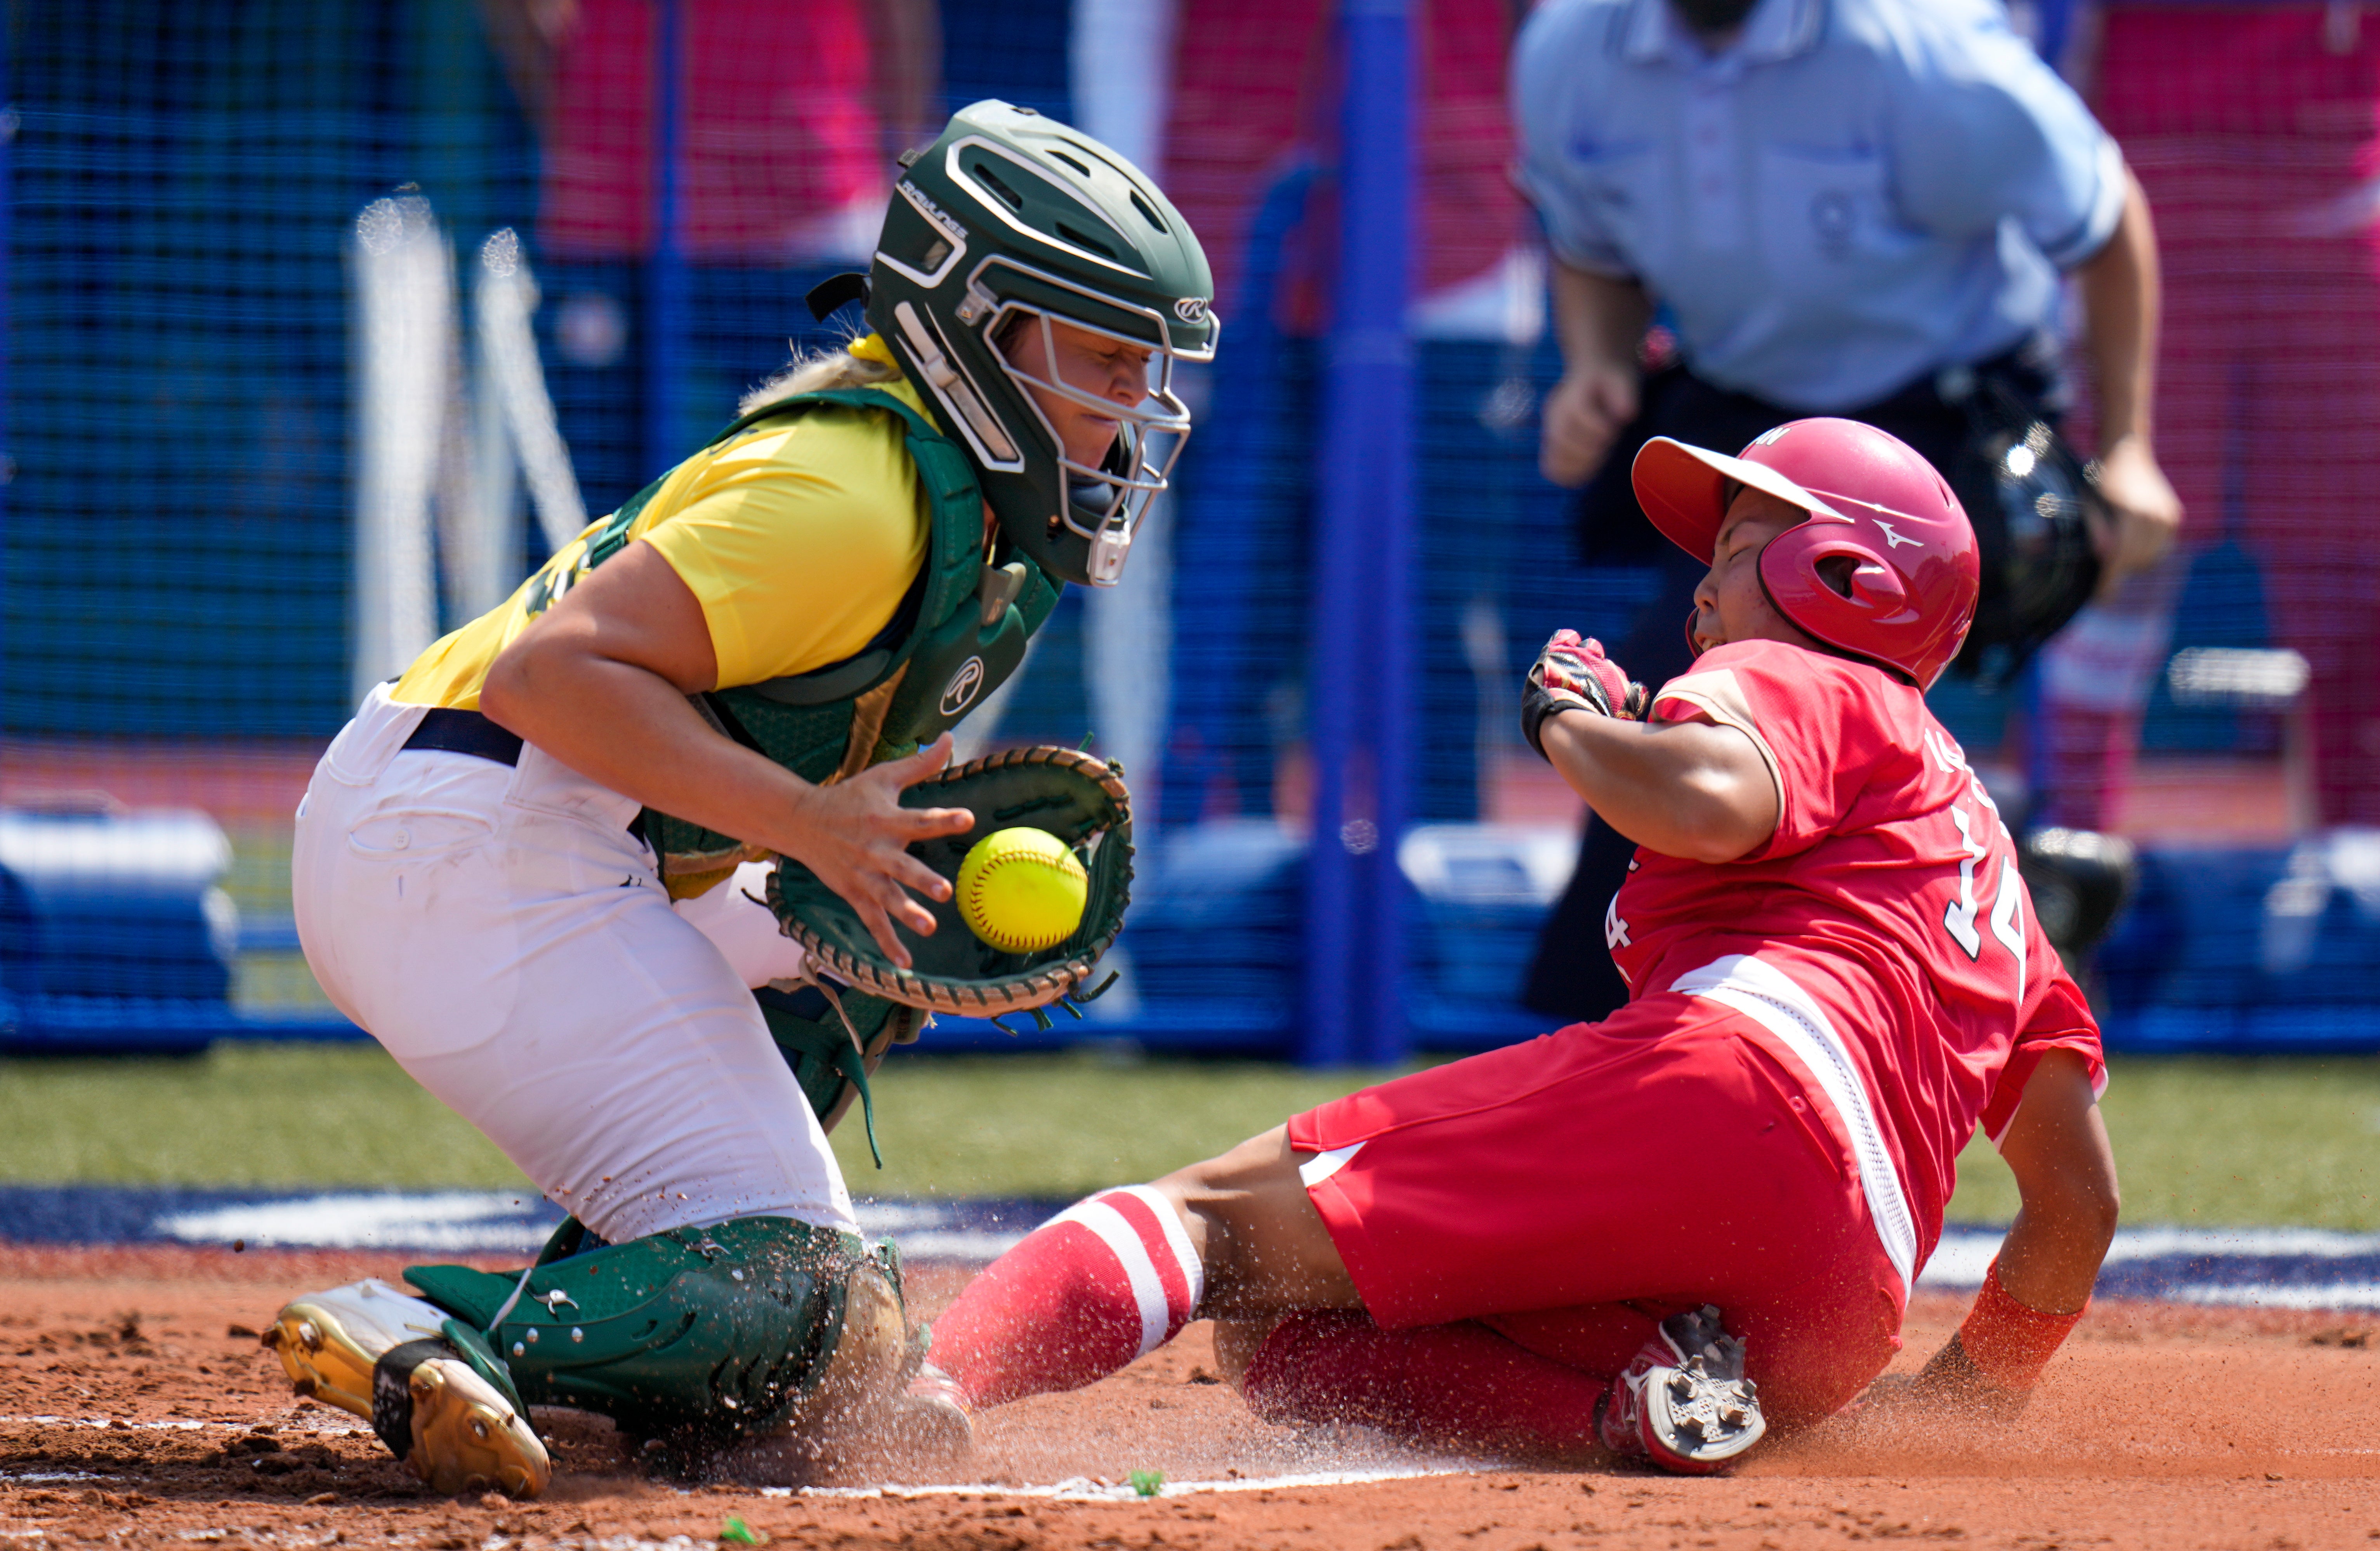 Tokyo 2020 got under way with softball action